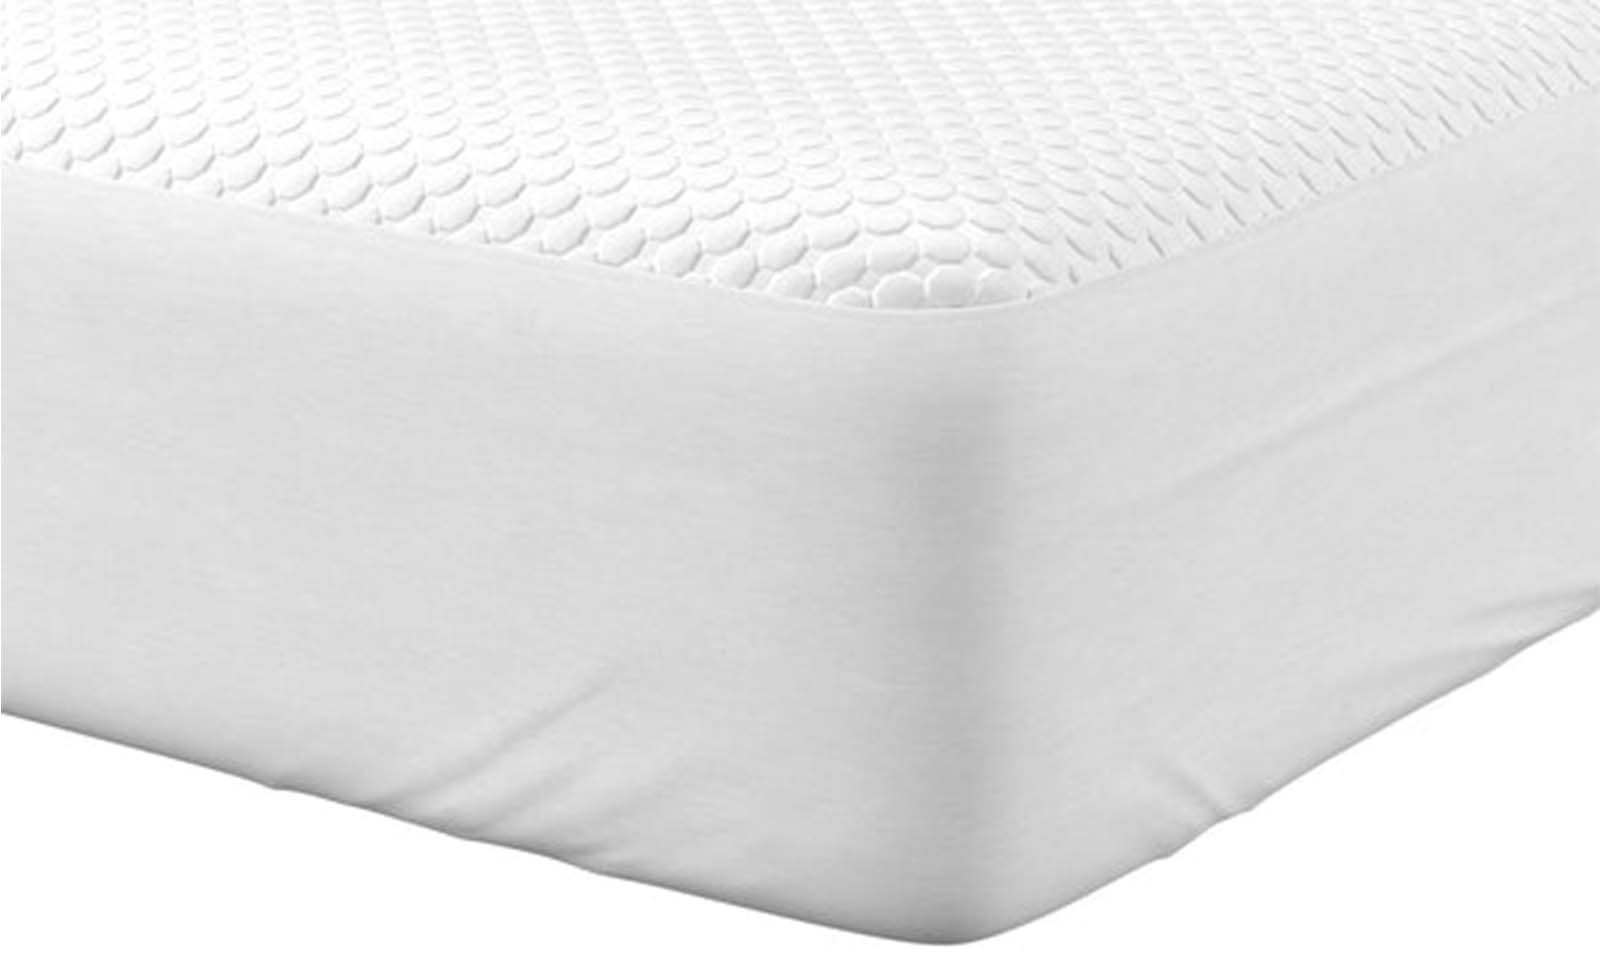 is the wendells mattress protector washable